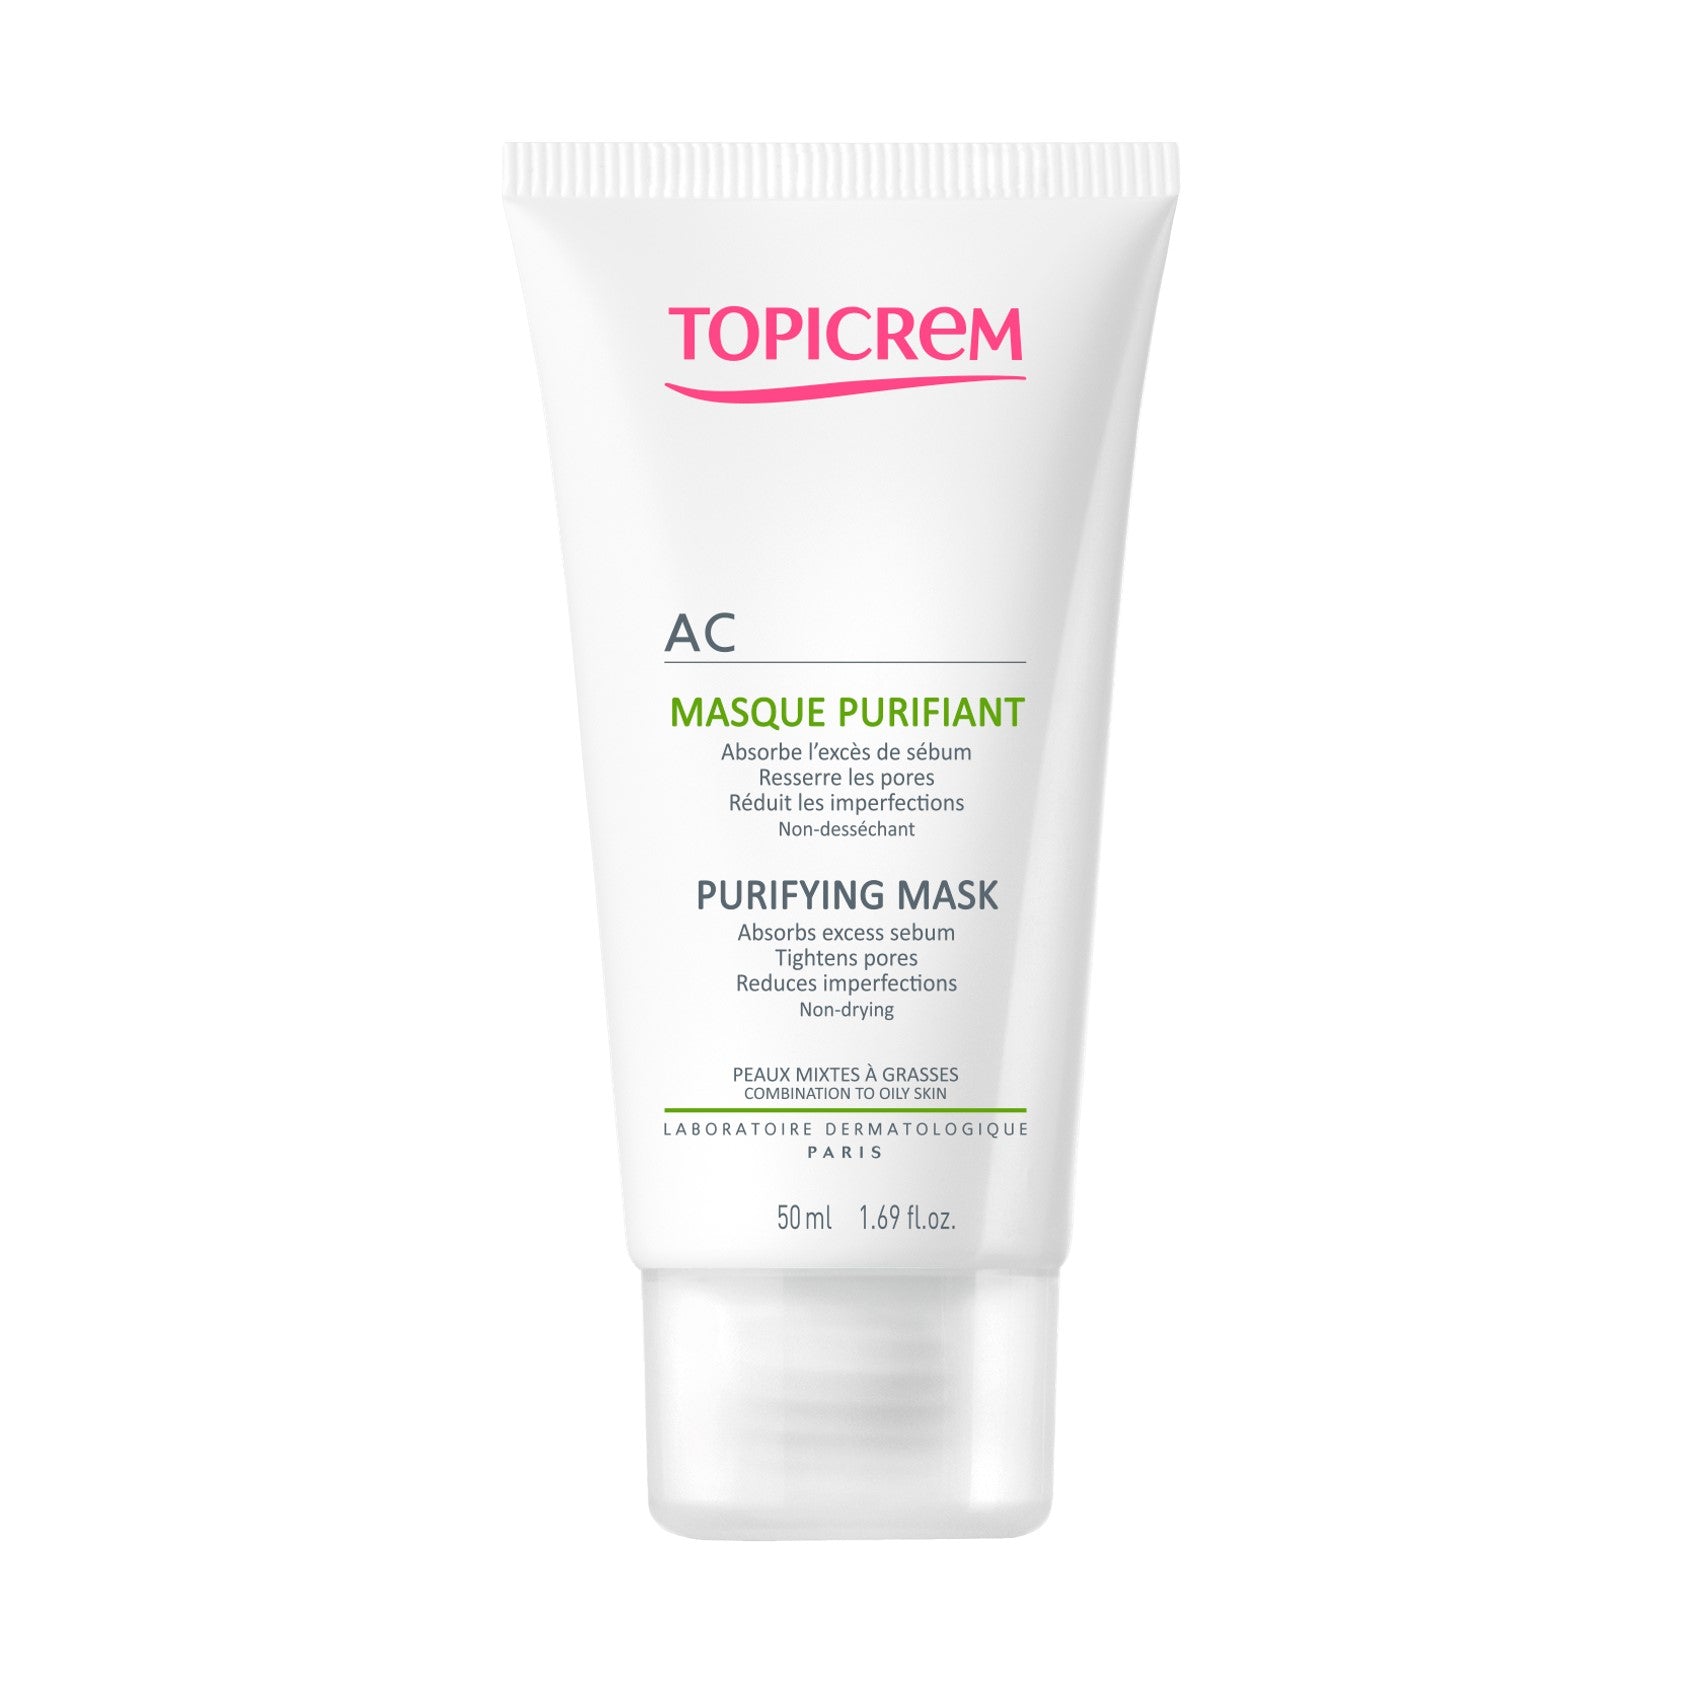 Topicrem AC Purifying Mask 50ml | Goods Department Store